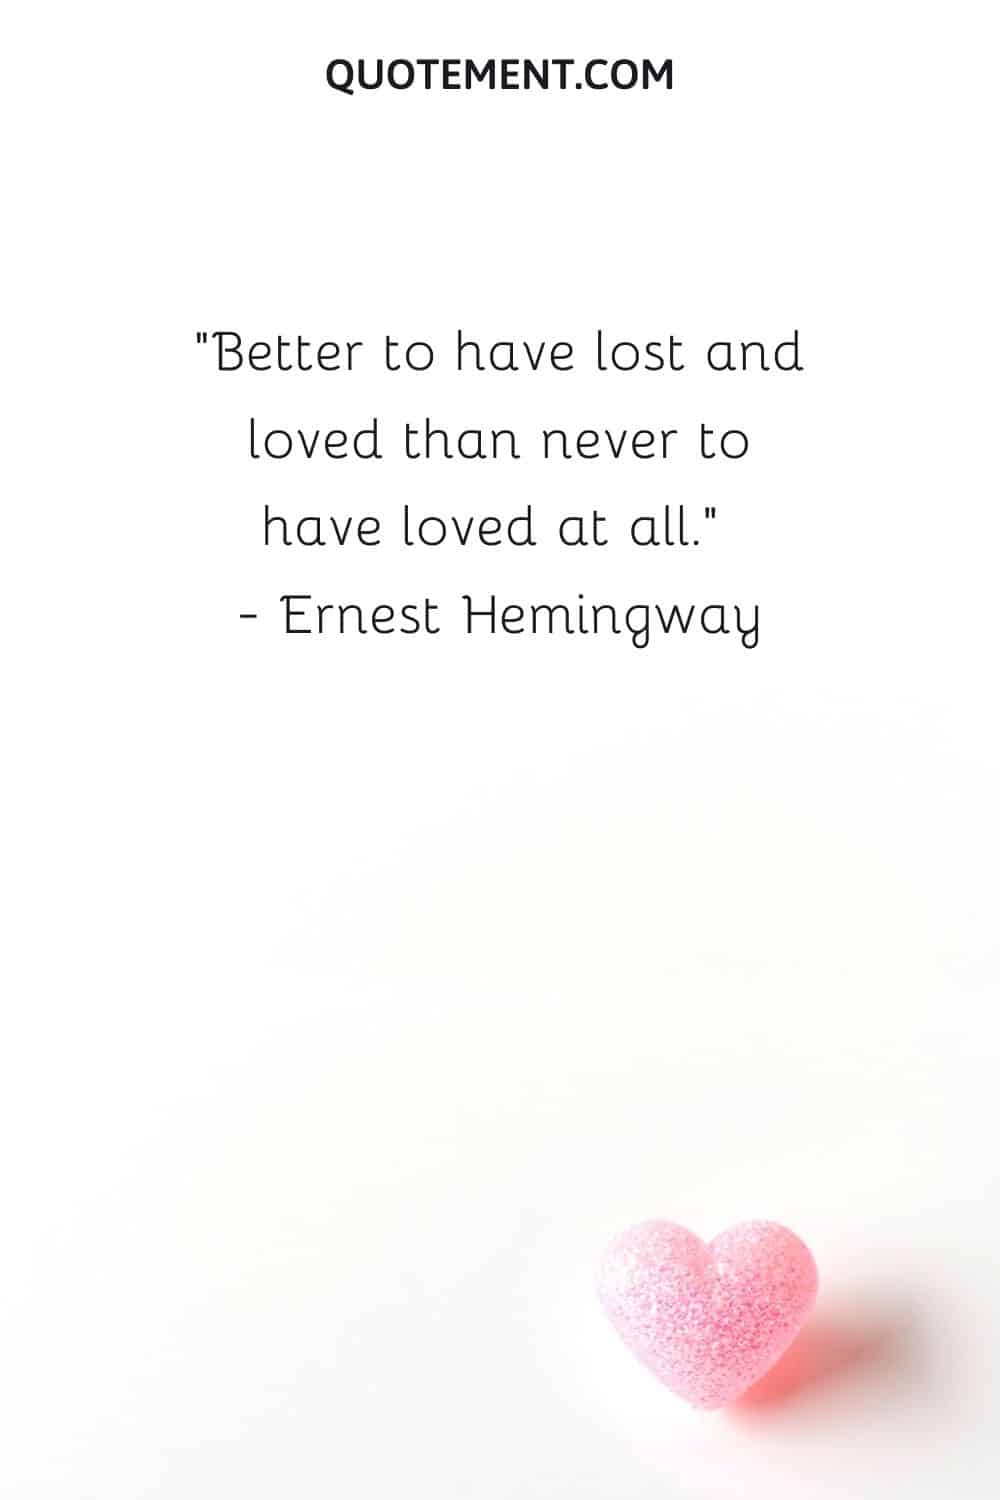 Better to have lost and loved than never to have loved at all.